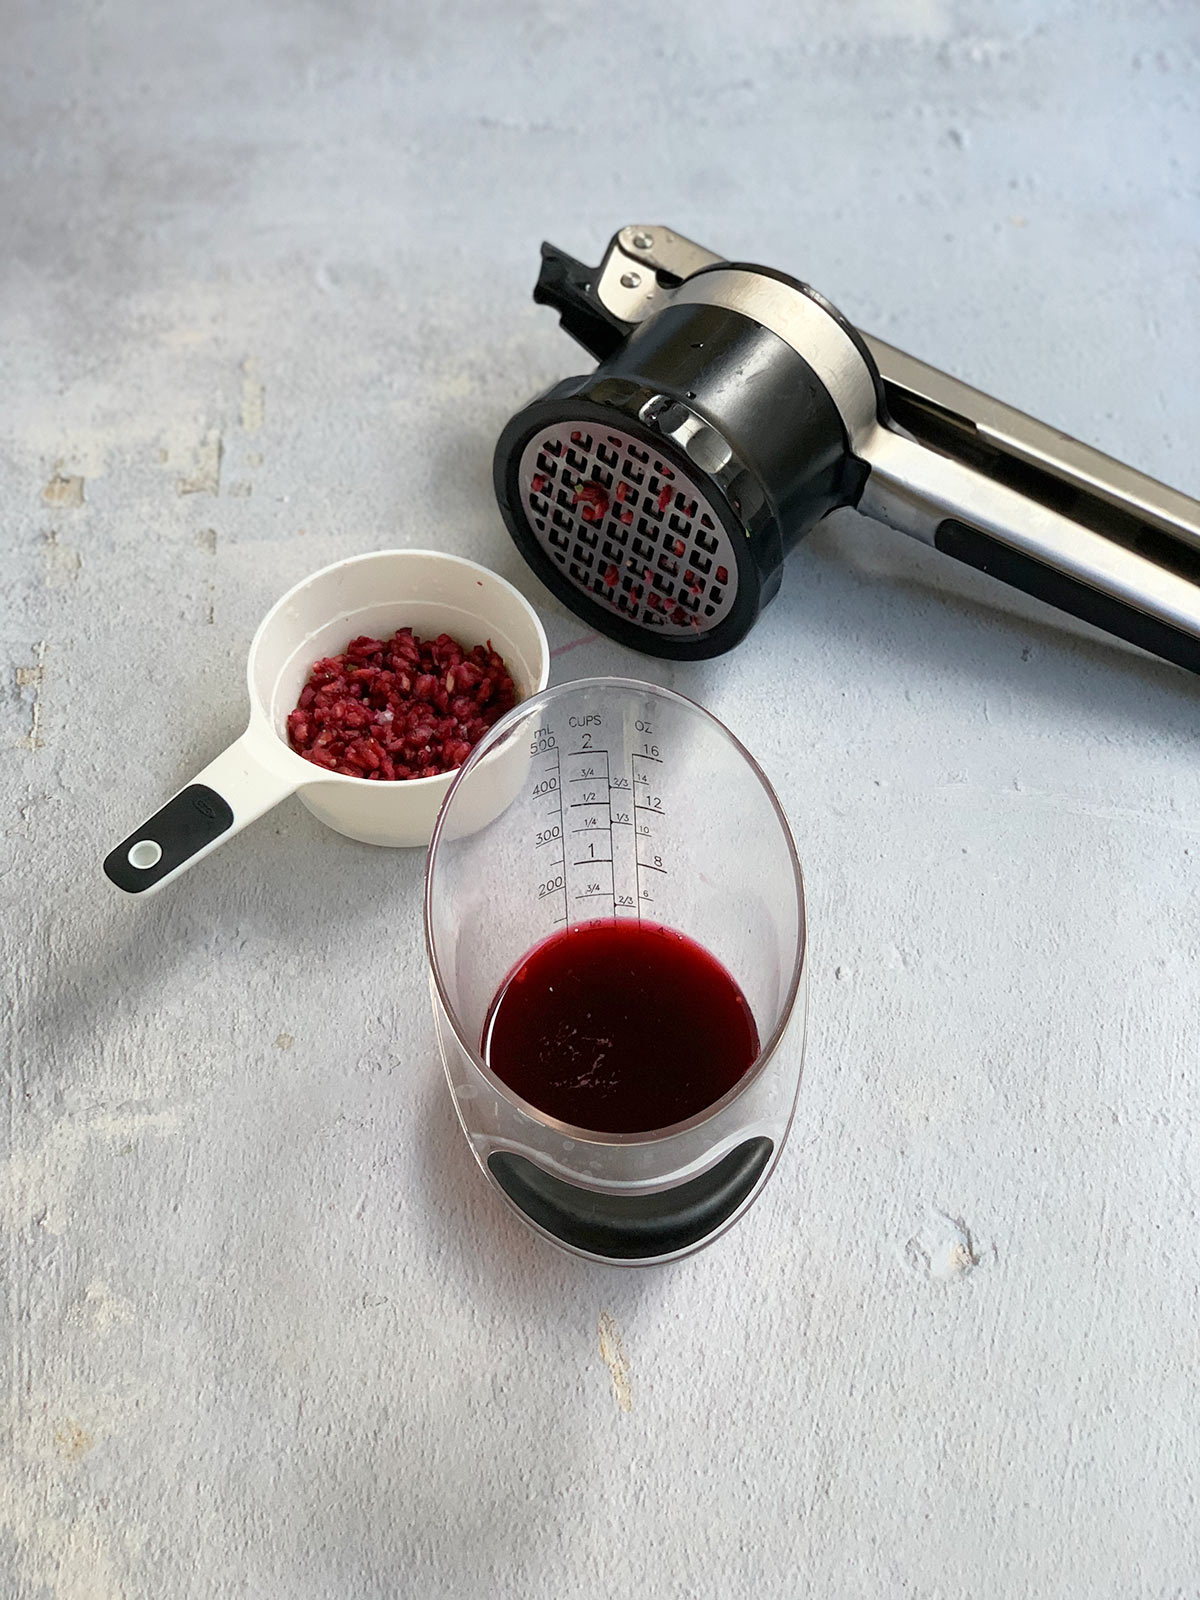 Fresh pressed pomegranate juice in a measuring glass with ricer and pressed seeds.